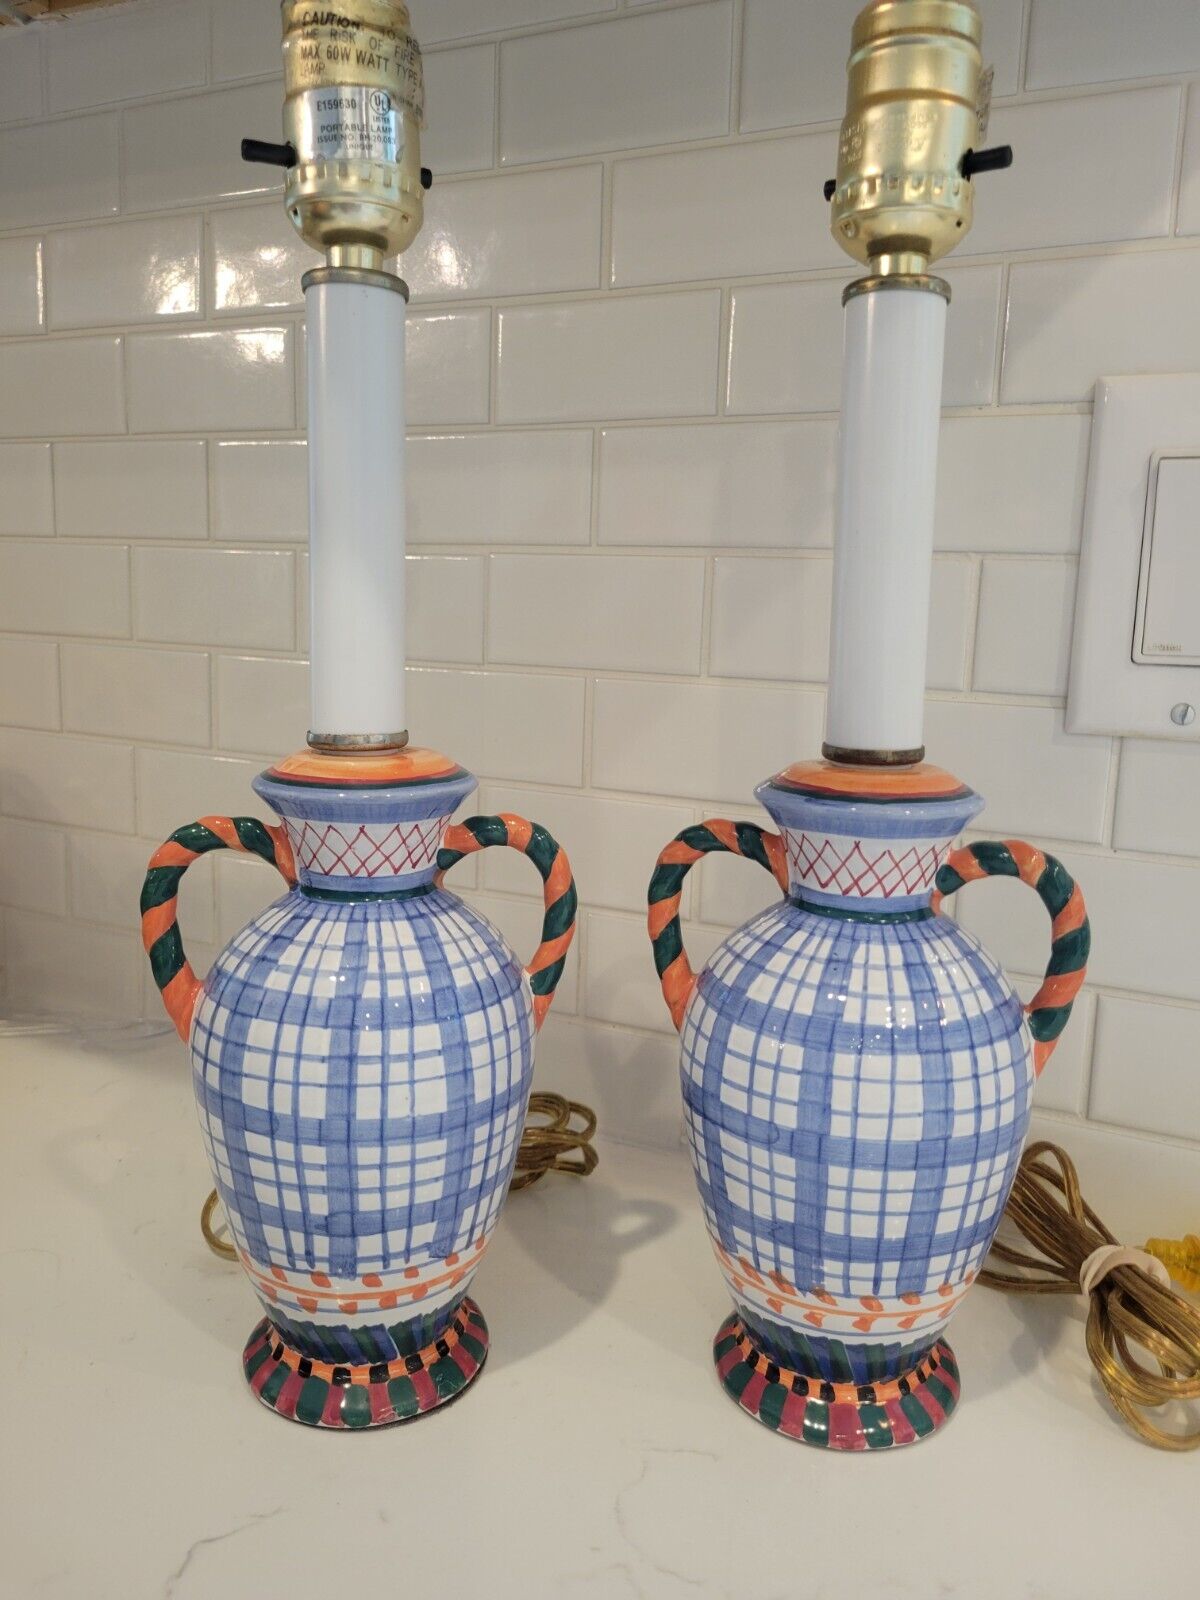 Vintage inspired hand painted Lamps - PAIR So Cute